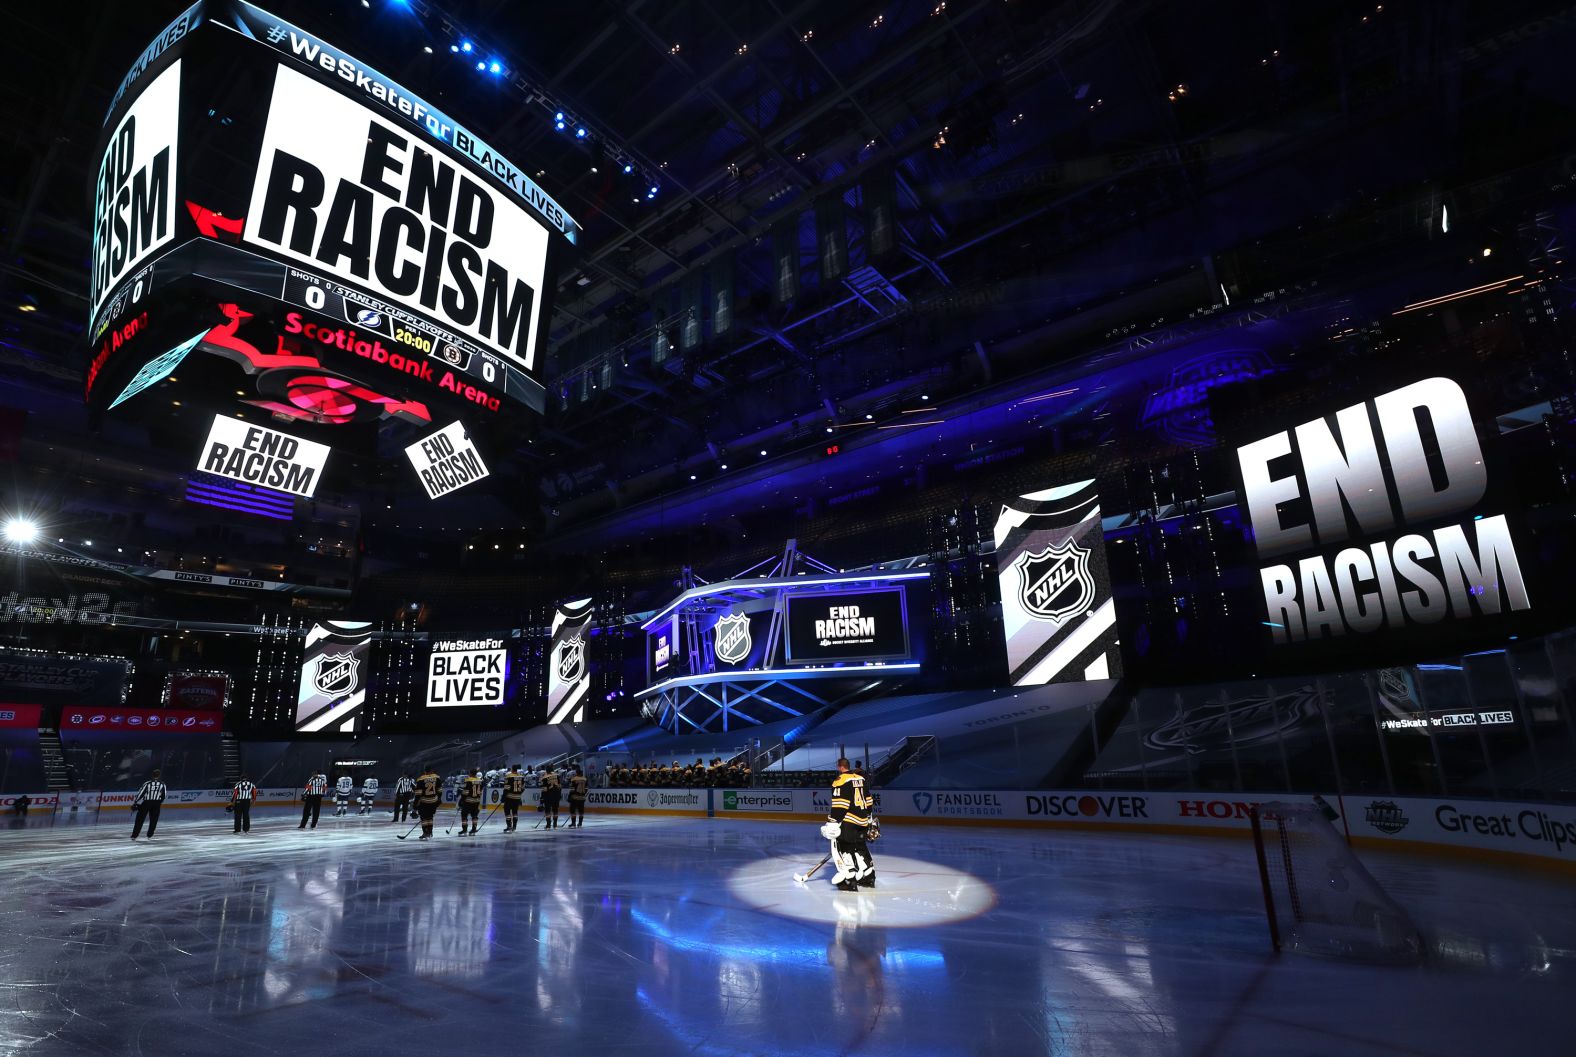 "End racism" banners are shown in Toronto's Scotiabank Arena before an NHL playoff game on August 26.